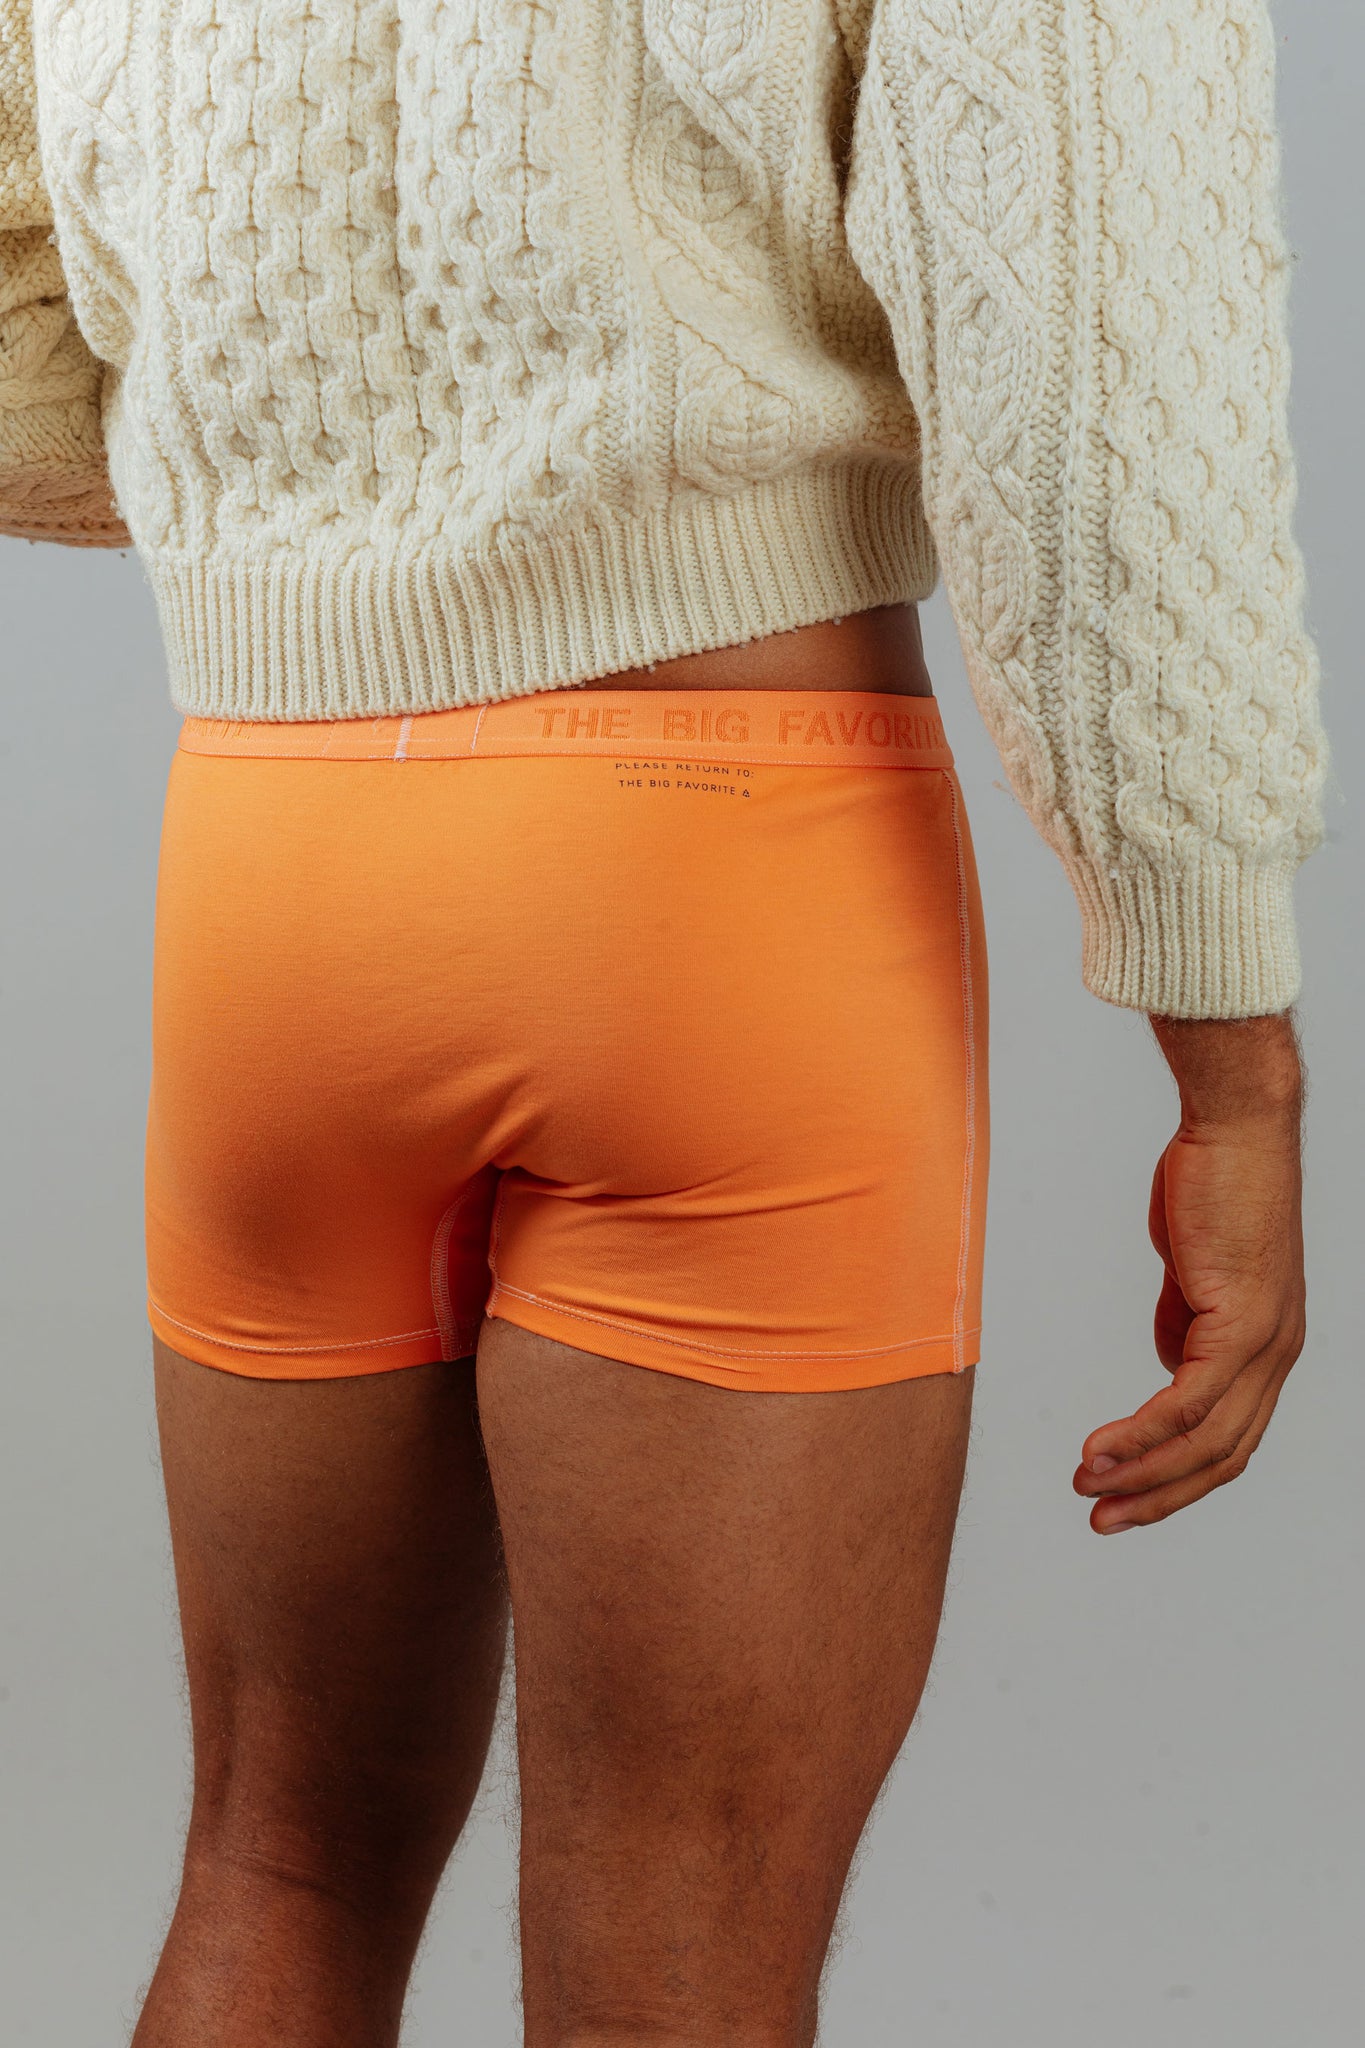 The Natural Dye Boxer Brief